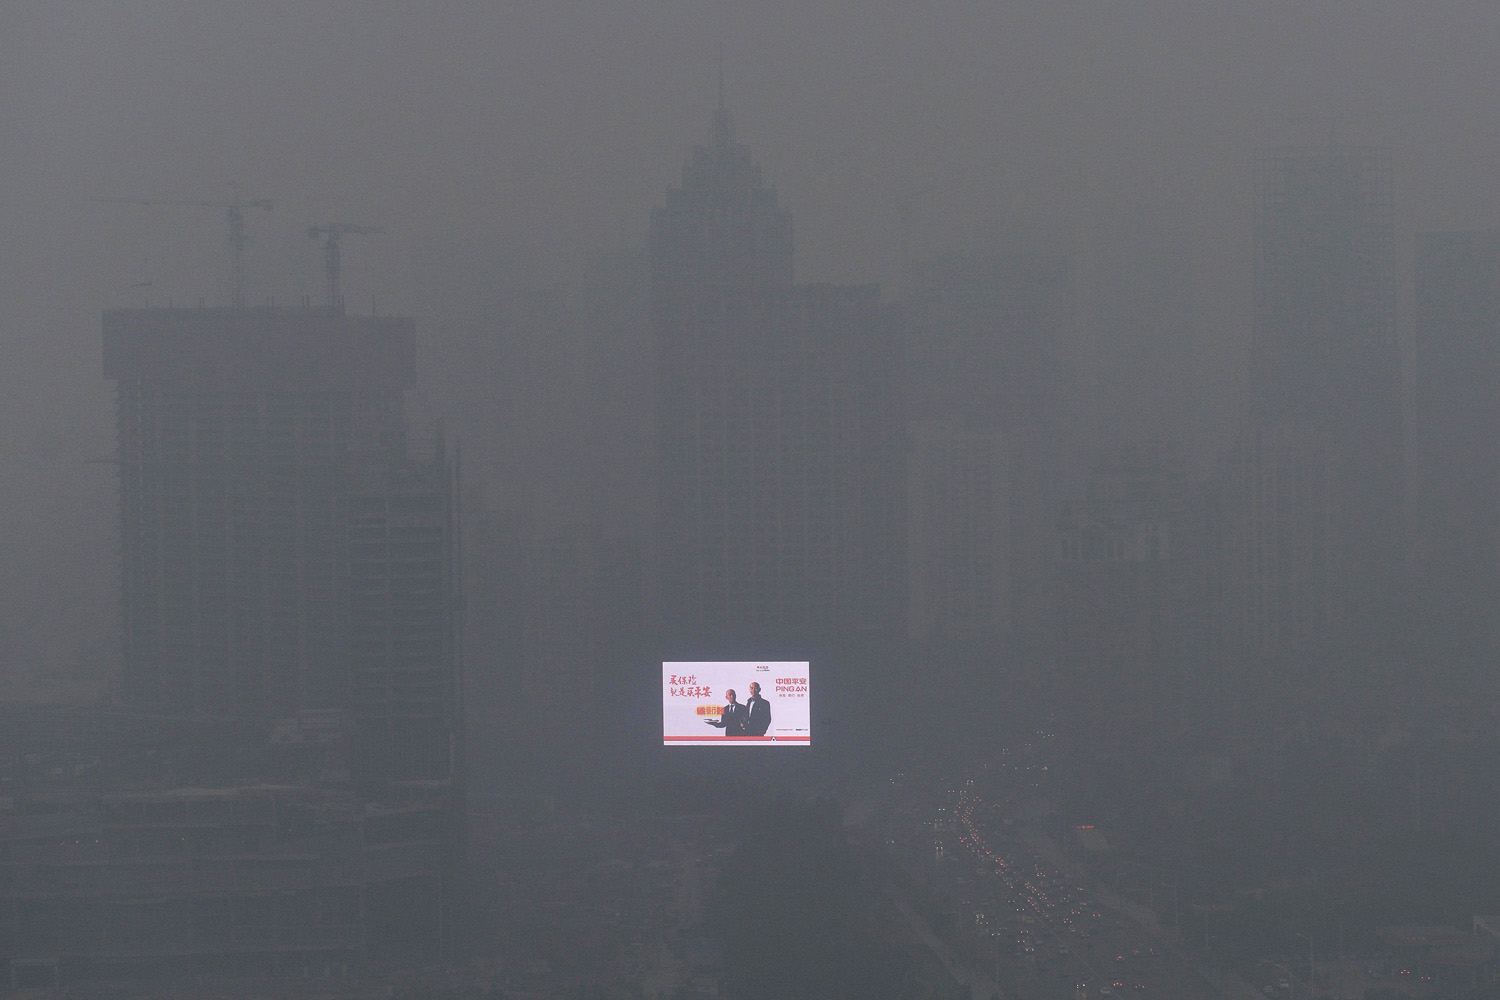 Oct. 28, 2013. An electronic screen is seen on a building amid heavy smog in Shenyang, Liaoning province, China.